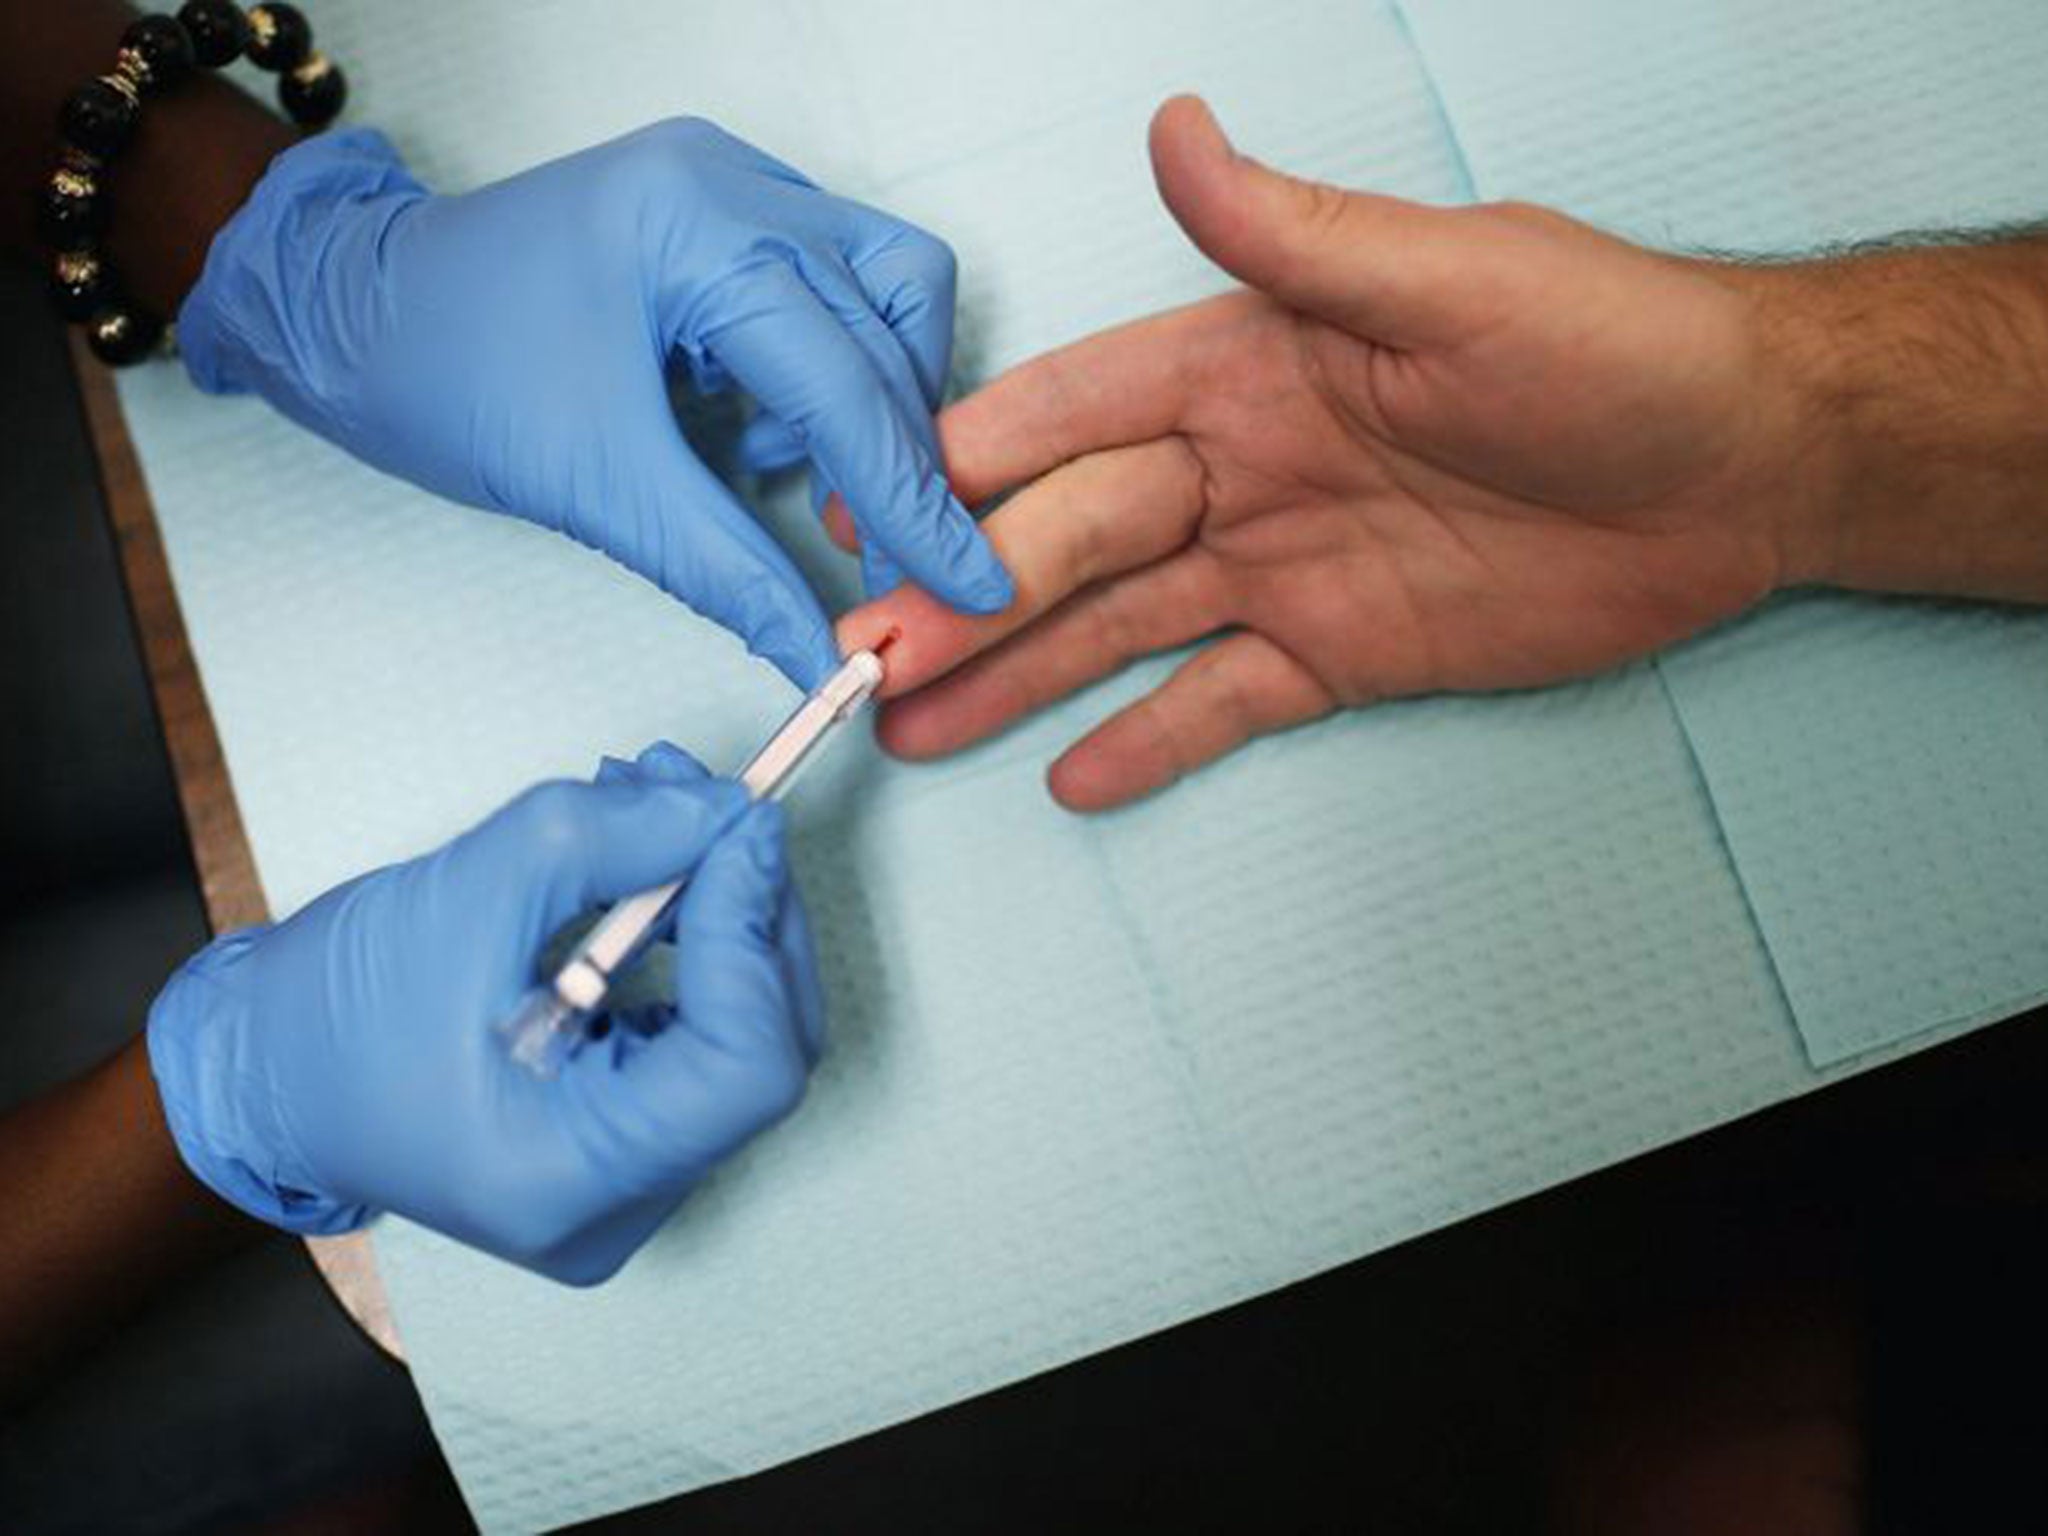 HIV point of care tests provide results within minutes